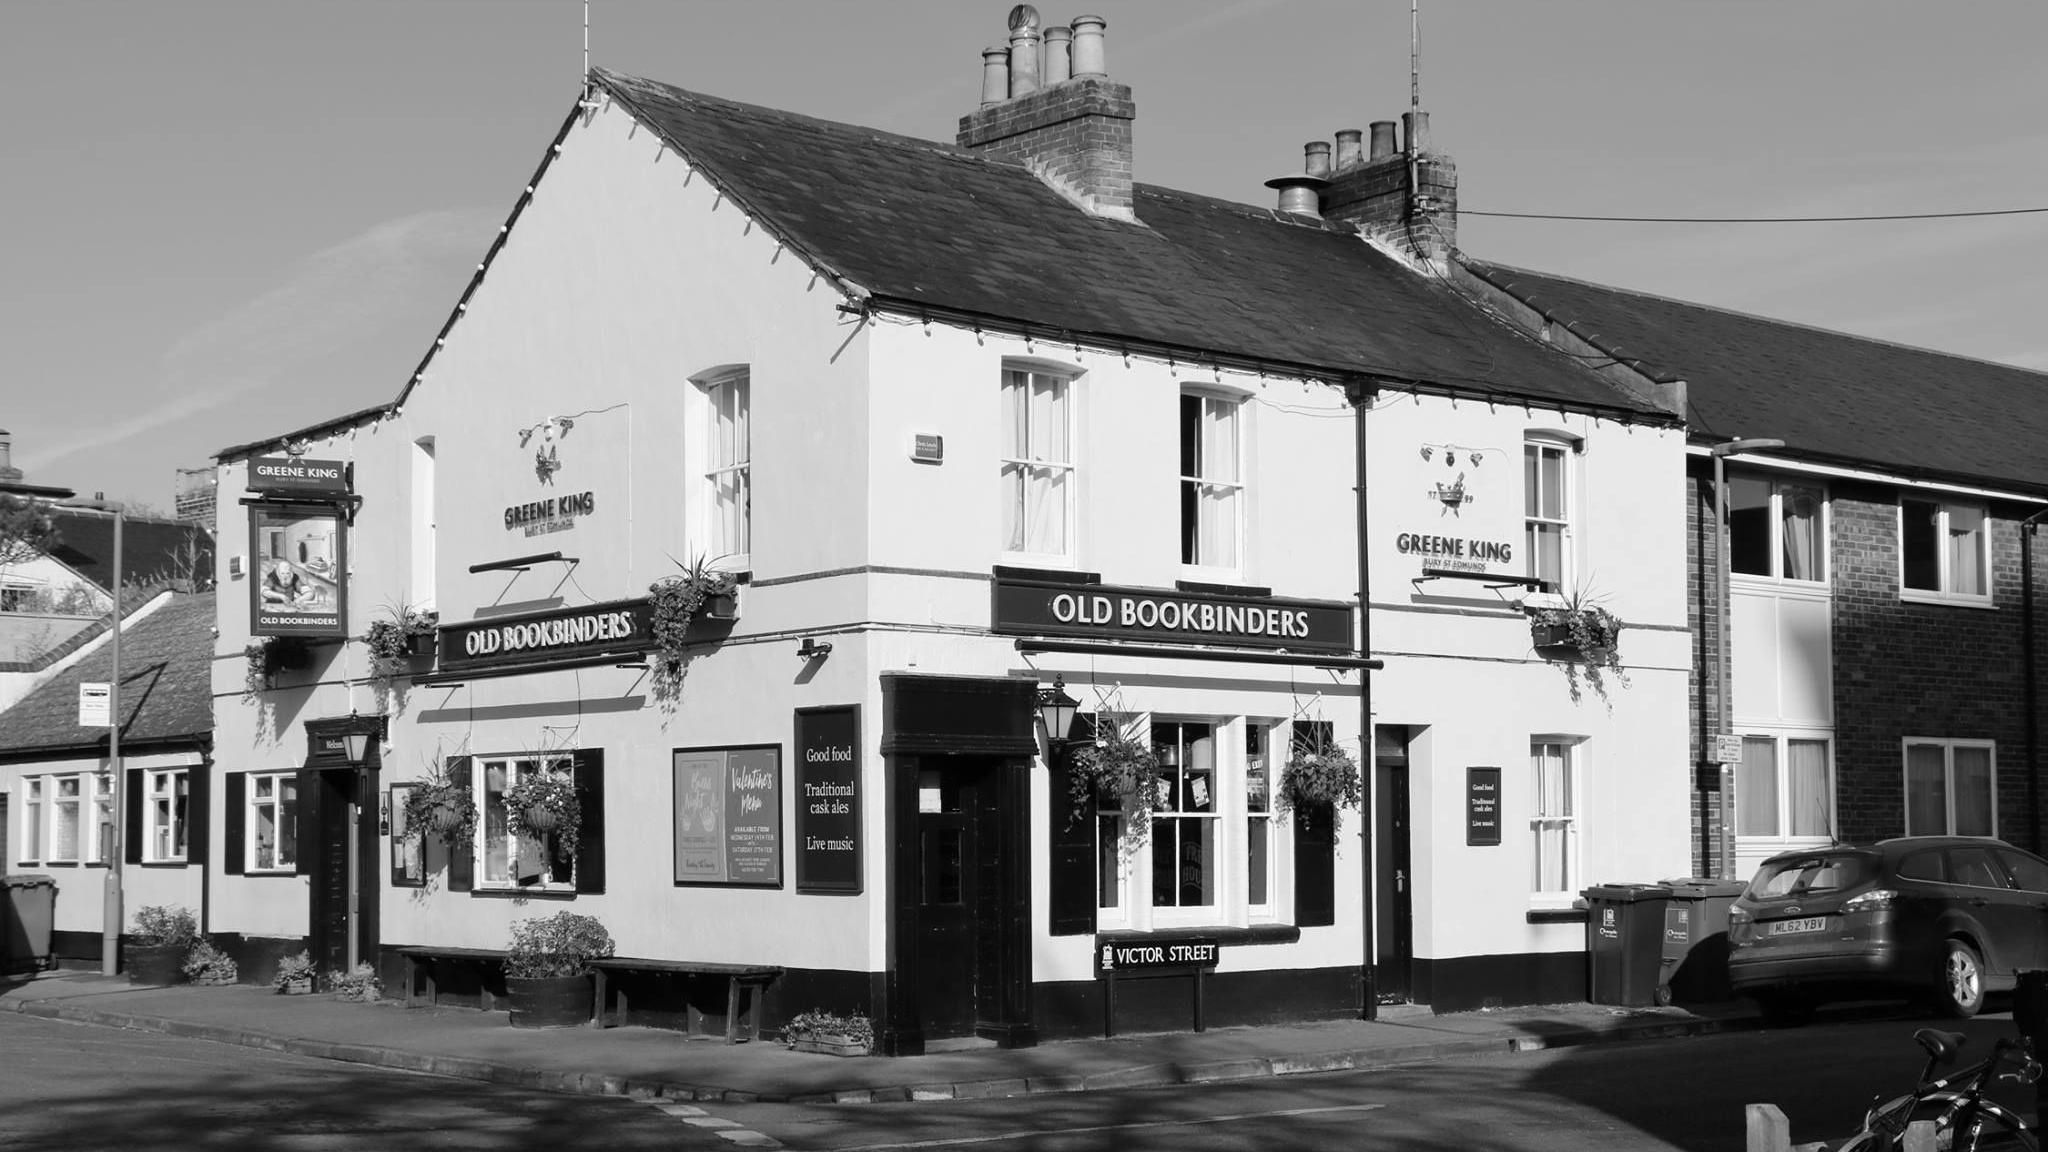 The Old Bookbinders pub on a quiet Victor Street, with signs saying it offers good food, traditional cask ales and live music. This image is in black and white